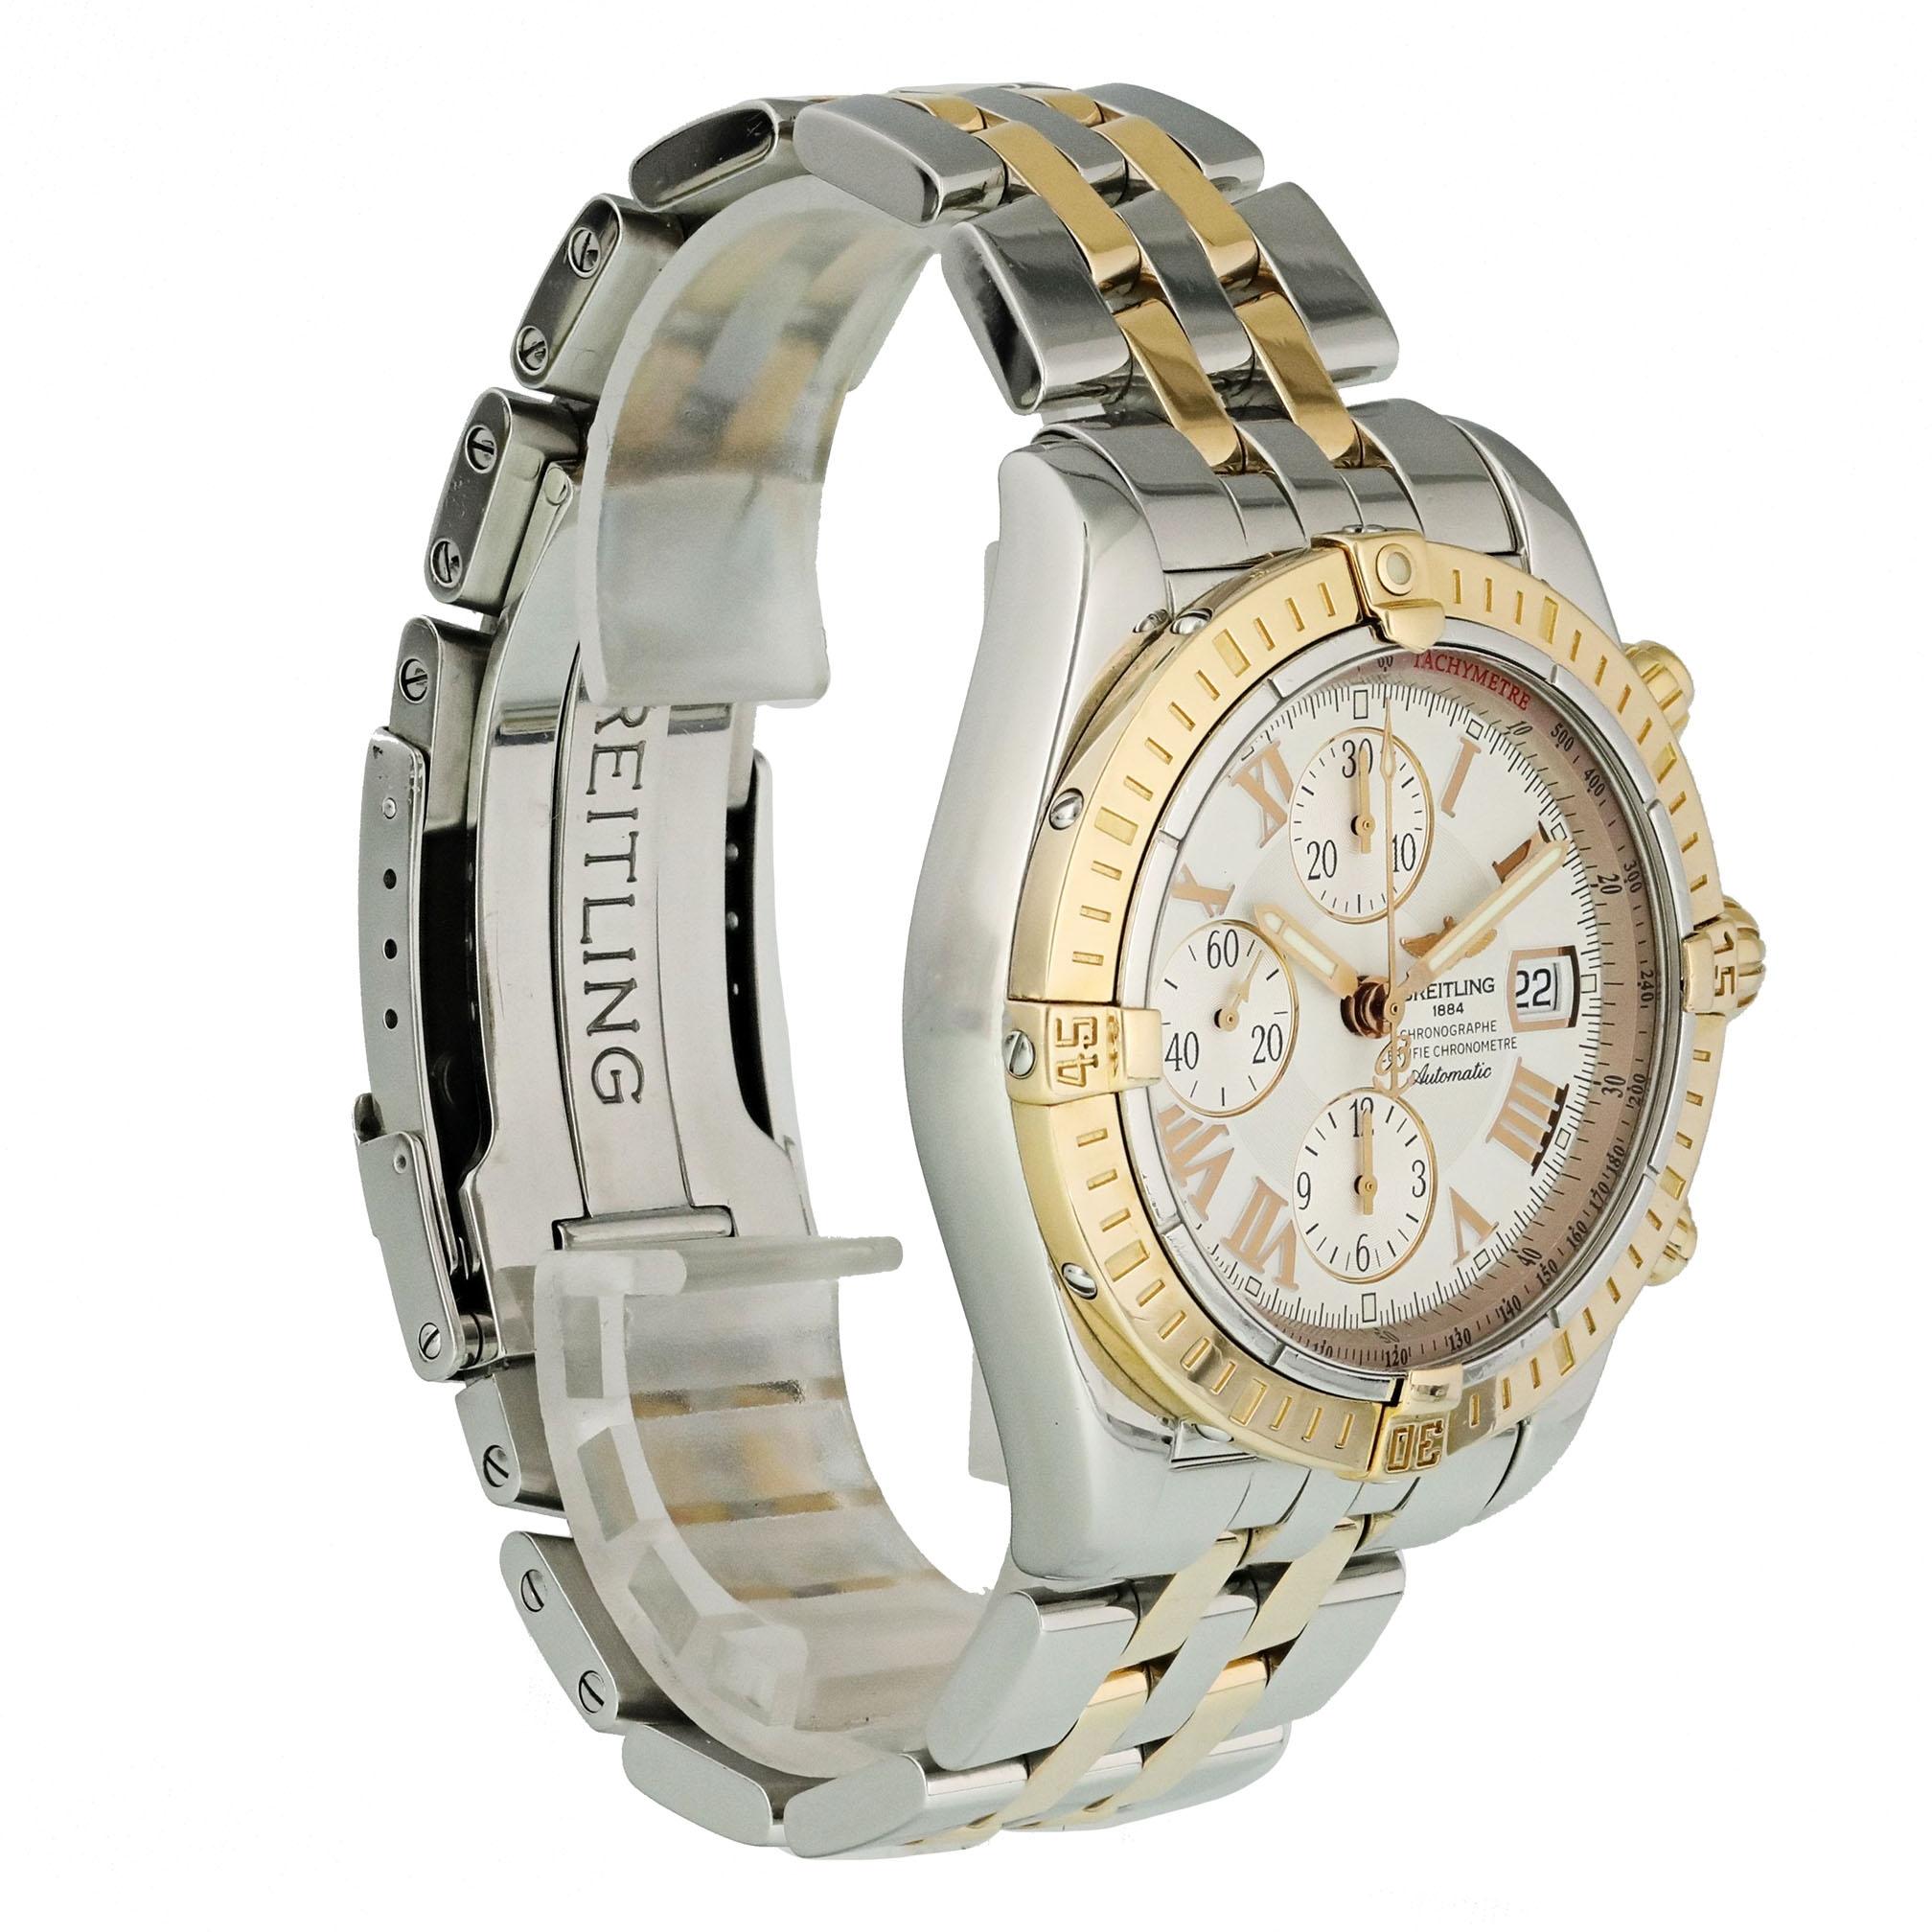 Breitling Chronomat C13356 Men Watch. 
44mm Stainless Steel case. 
Rose gold Unidirectional bezel. 
White dial with luminous rose gold hands and Roman numeral hour markers. 
Minute markers on the outer dial. 
Date display at the 3 o'clock position.